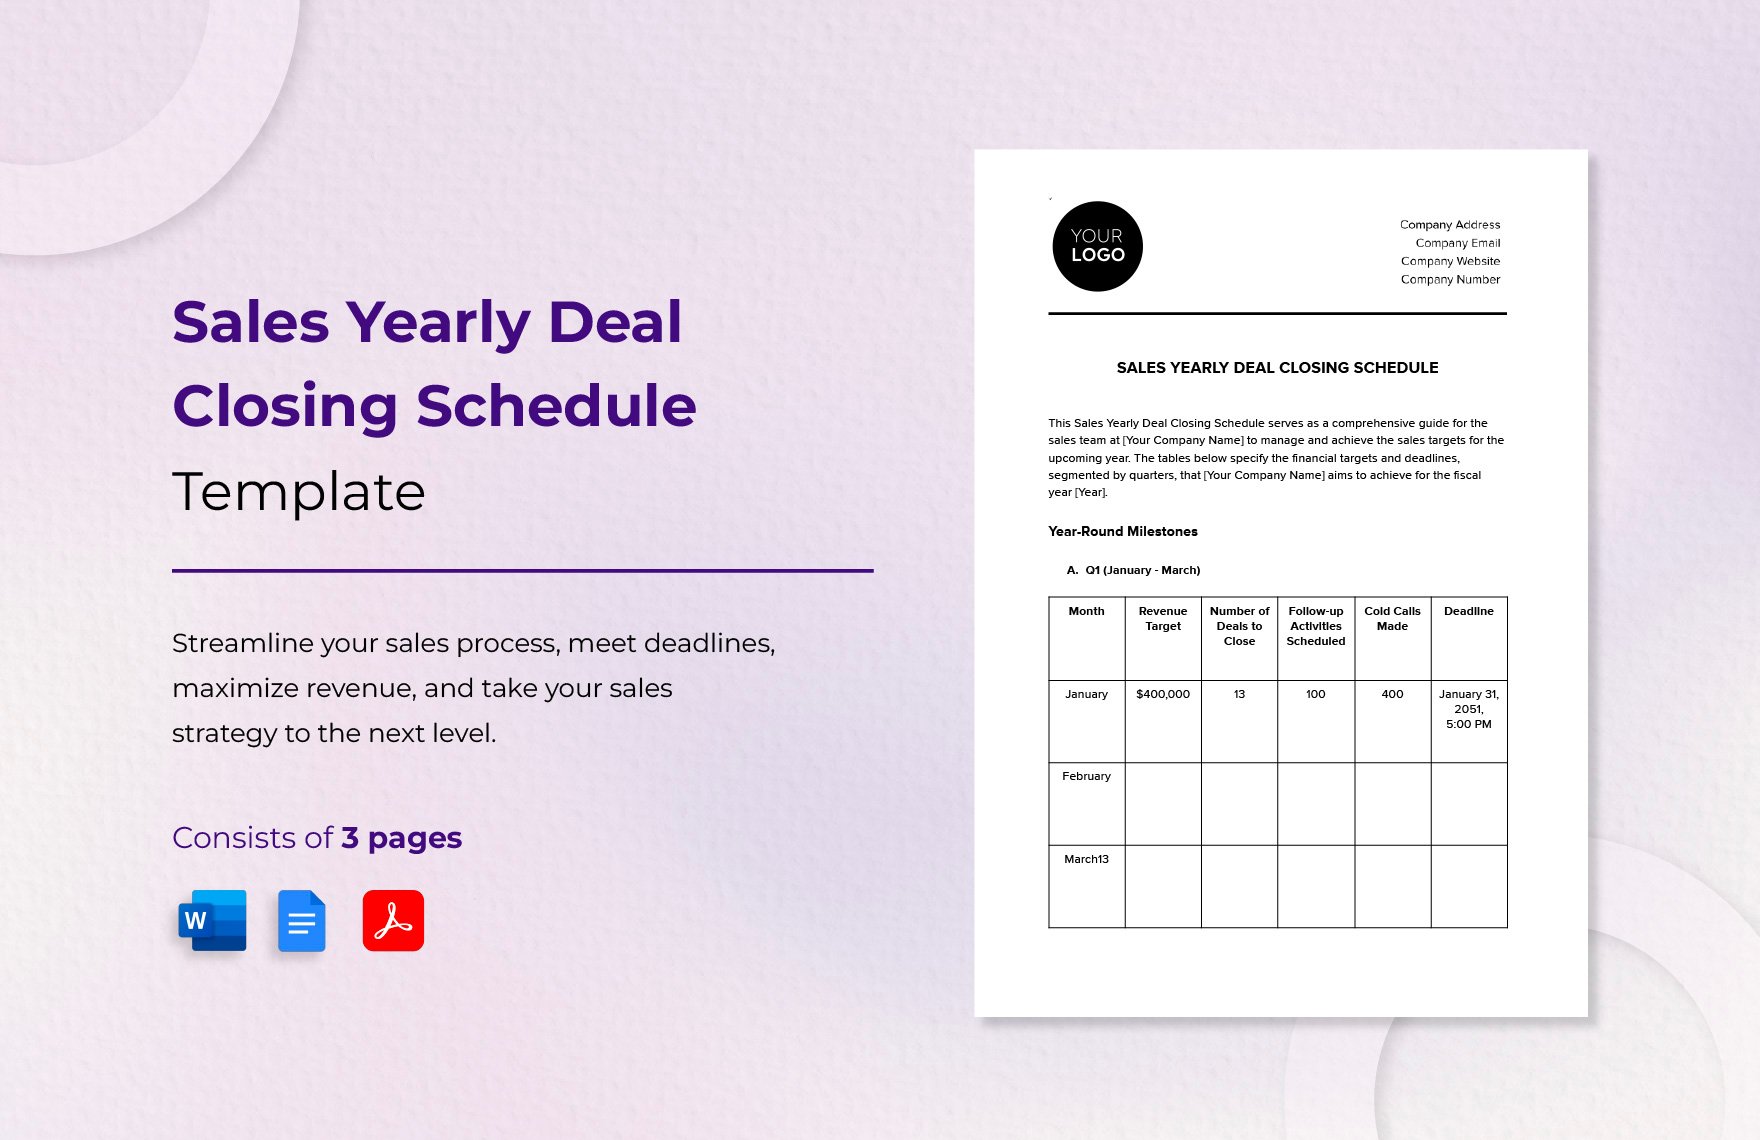 Sales Yearly Deal Closing Schedule Template in Word, Google Docs, PDF